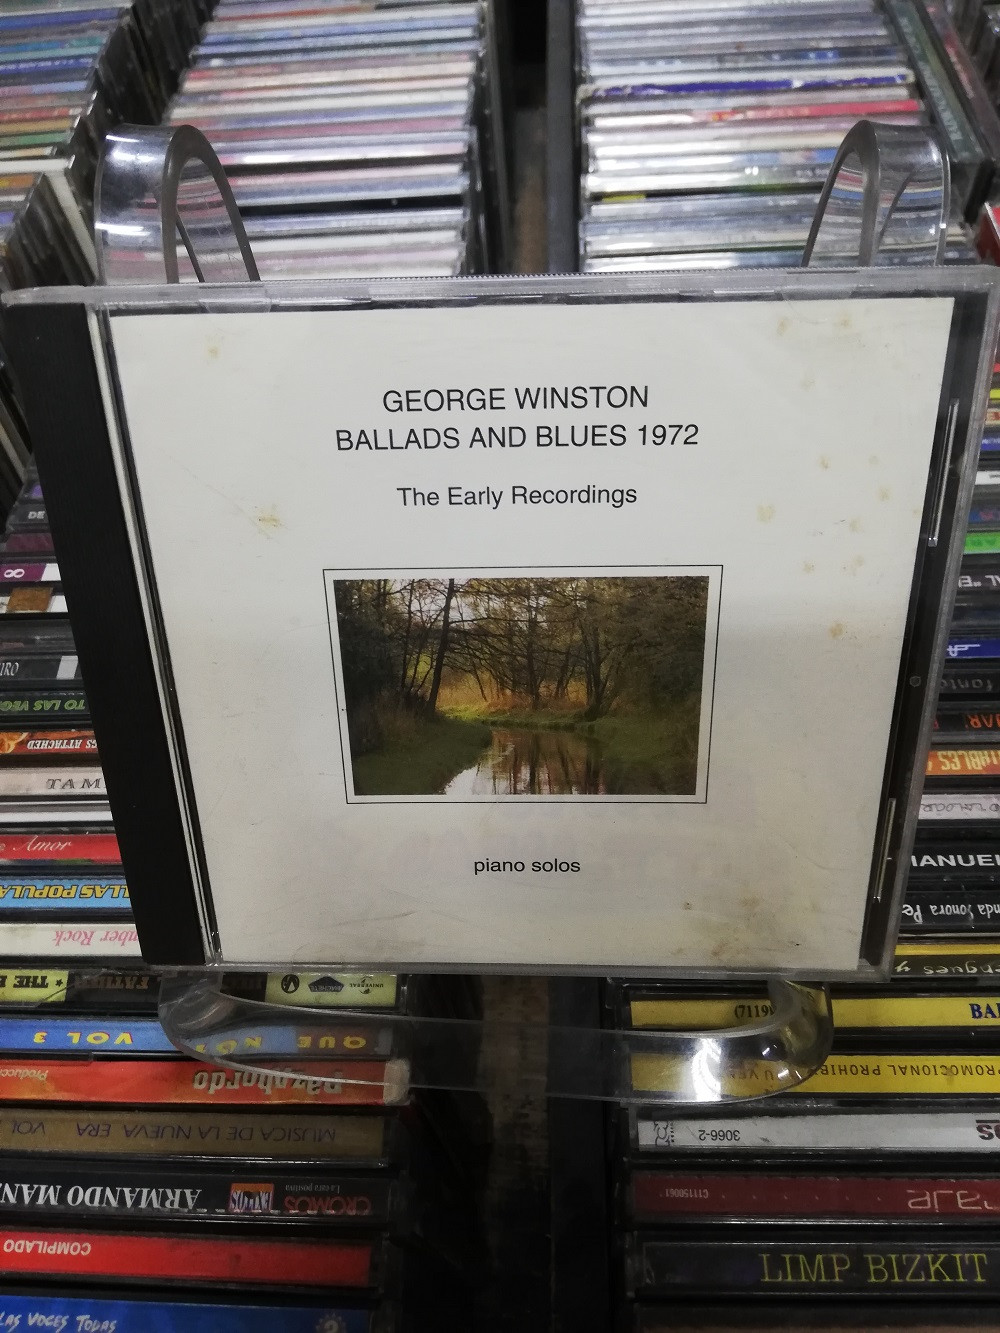 Imagen CD GEORGE WINSTON, BALLADS AND BLUES 1972 - THE EARLY RECORDINGS 1